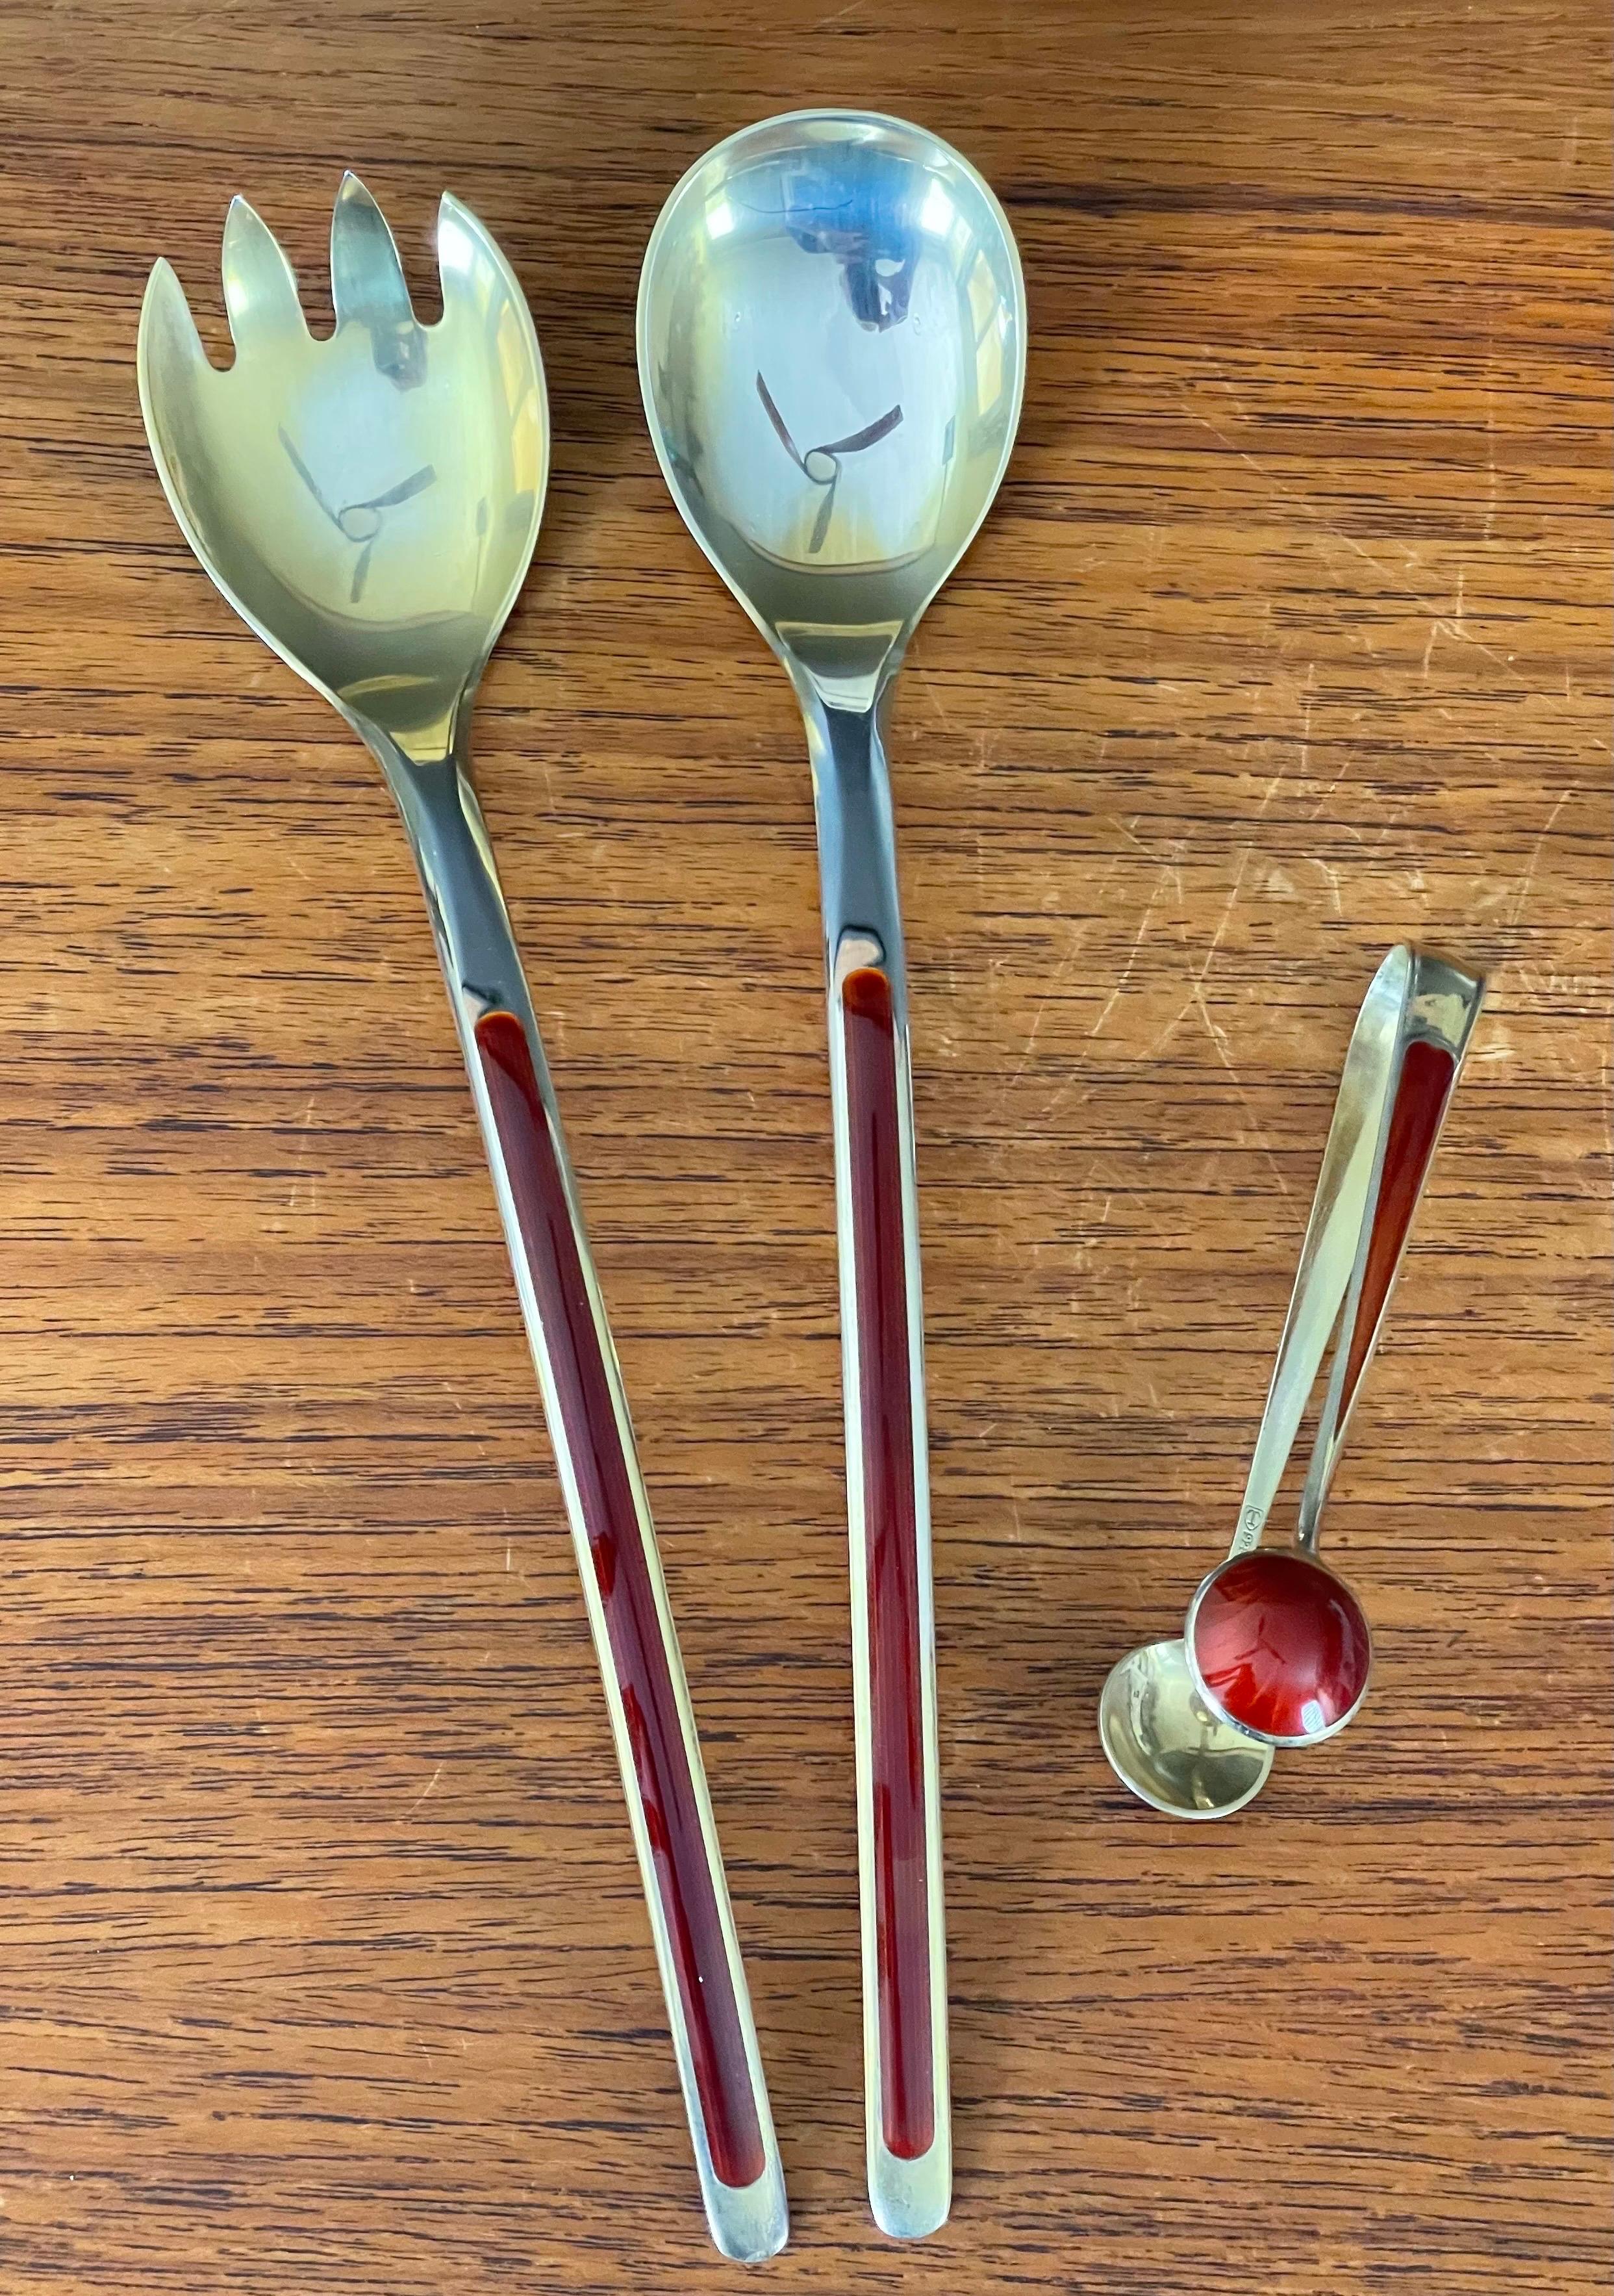 Simple and elegant stylized set of salad servers and tongs made of sterling silver and enamel by Norwegian designer N.M. Thune, circa 1960s. The set is in very good vintage condition and comes in its original box. The servers are 9.75